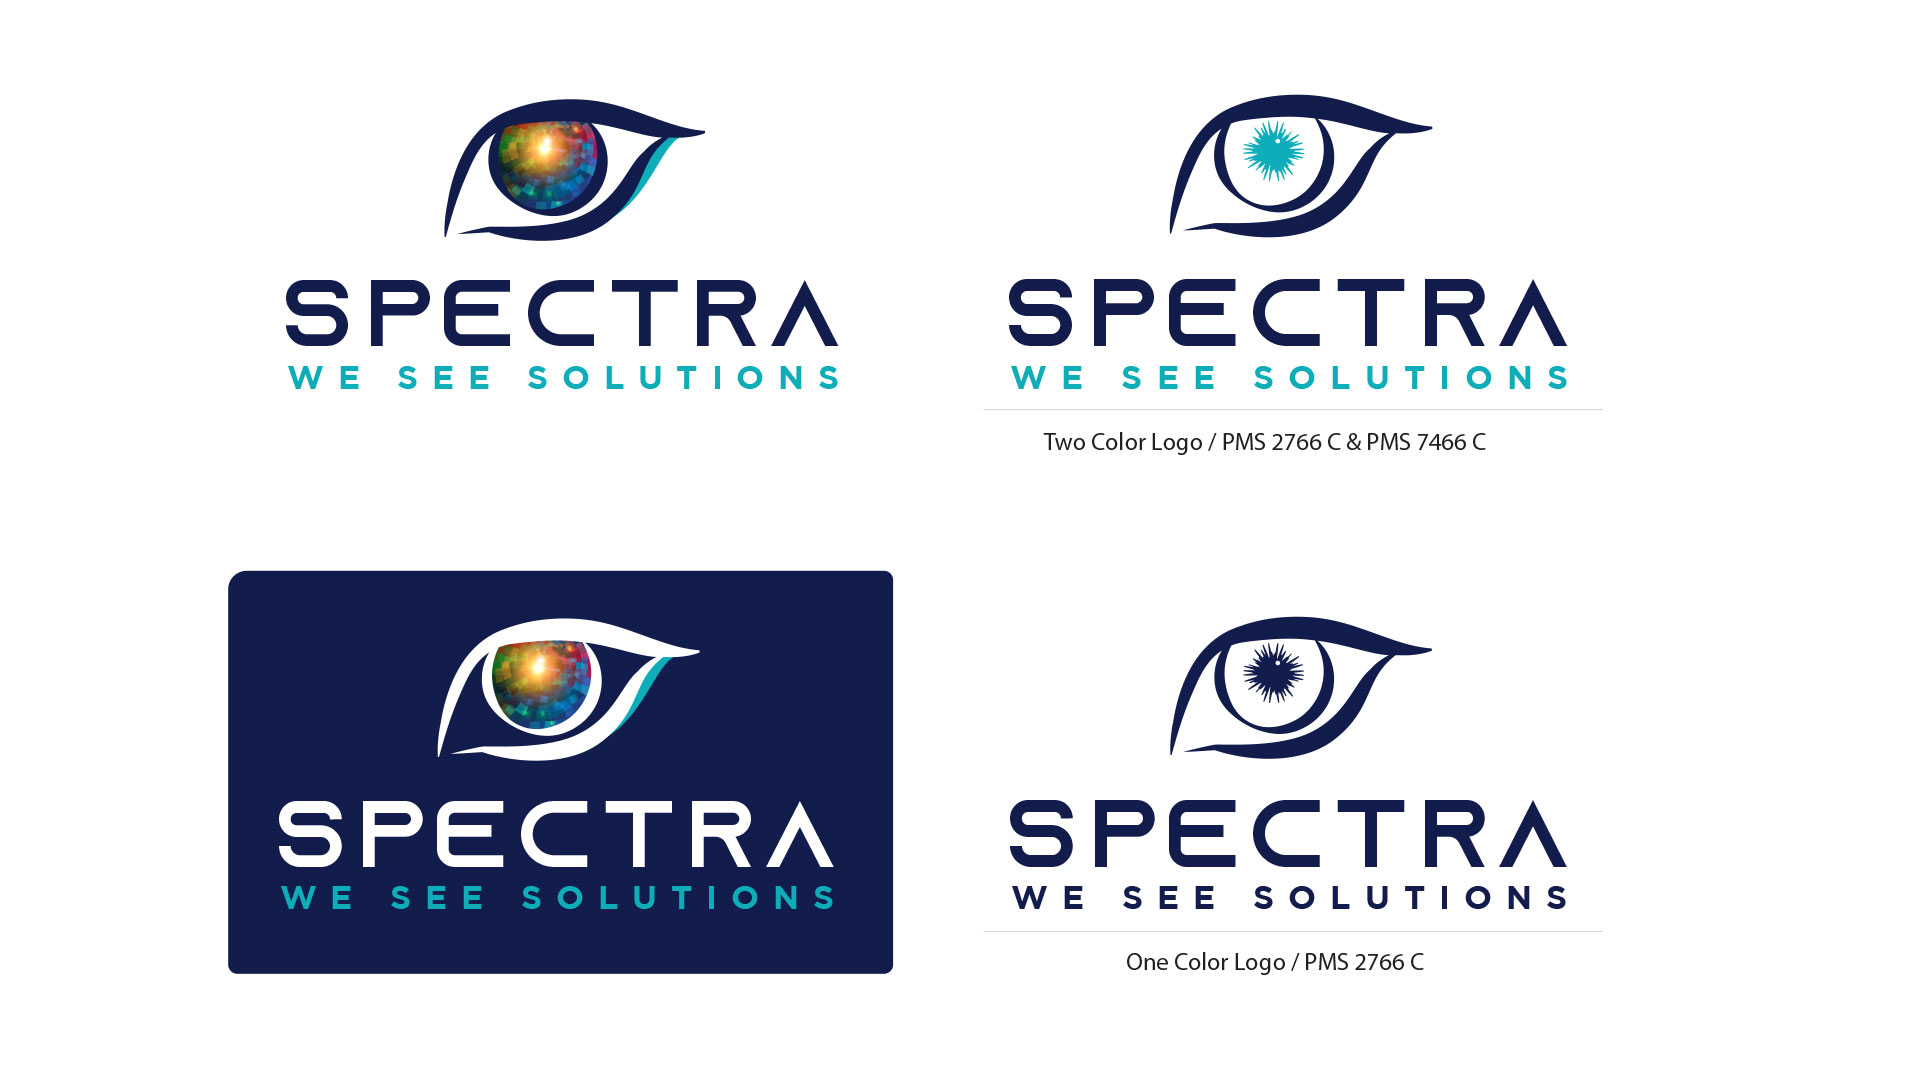 Spectra logos for all printing requirements